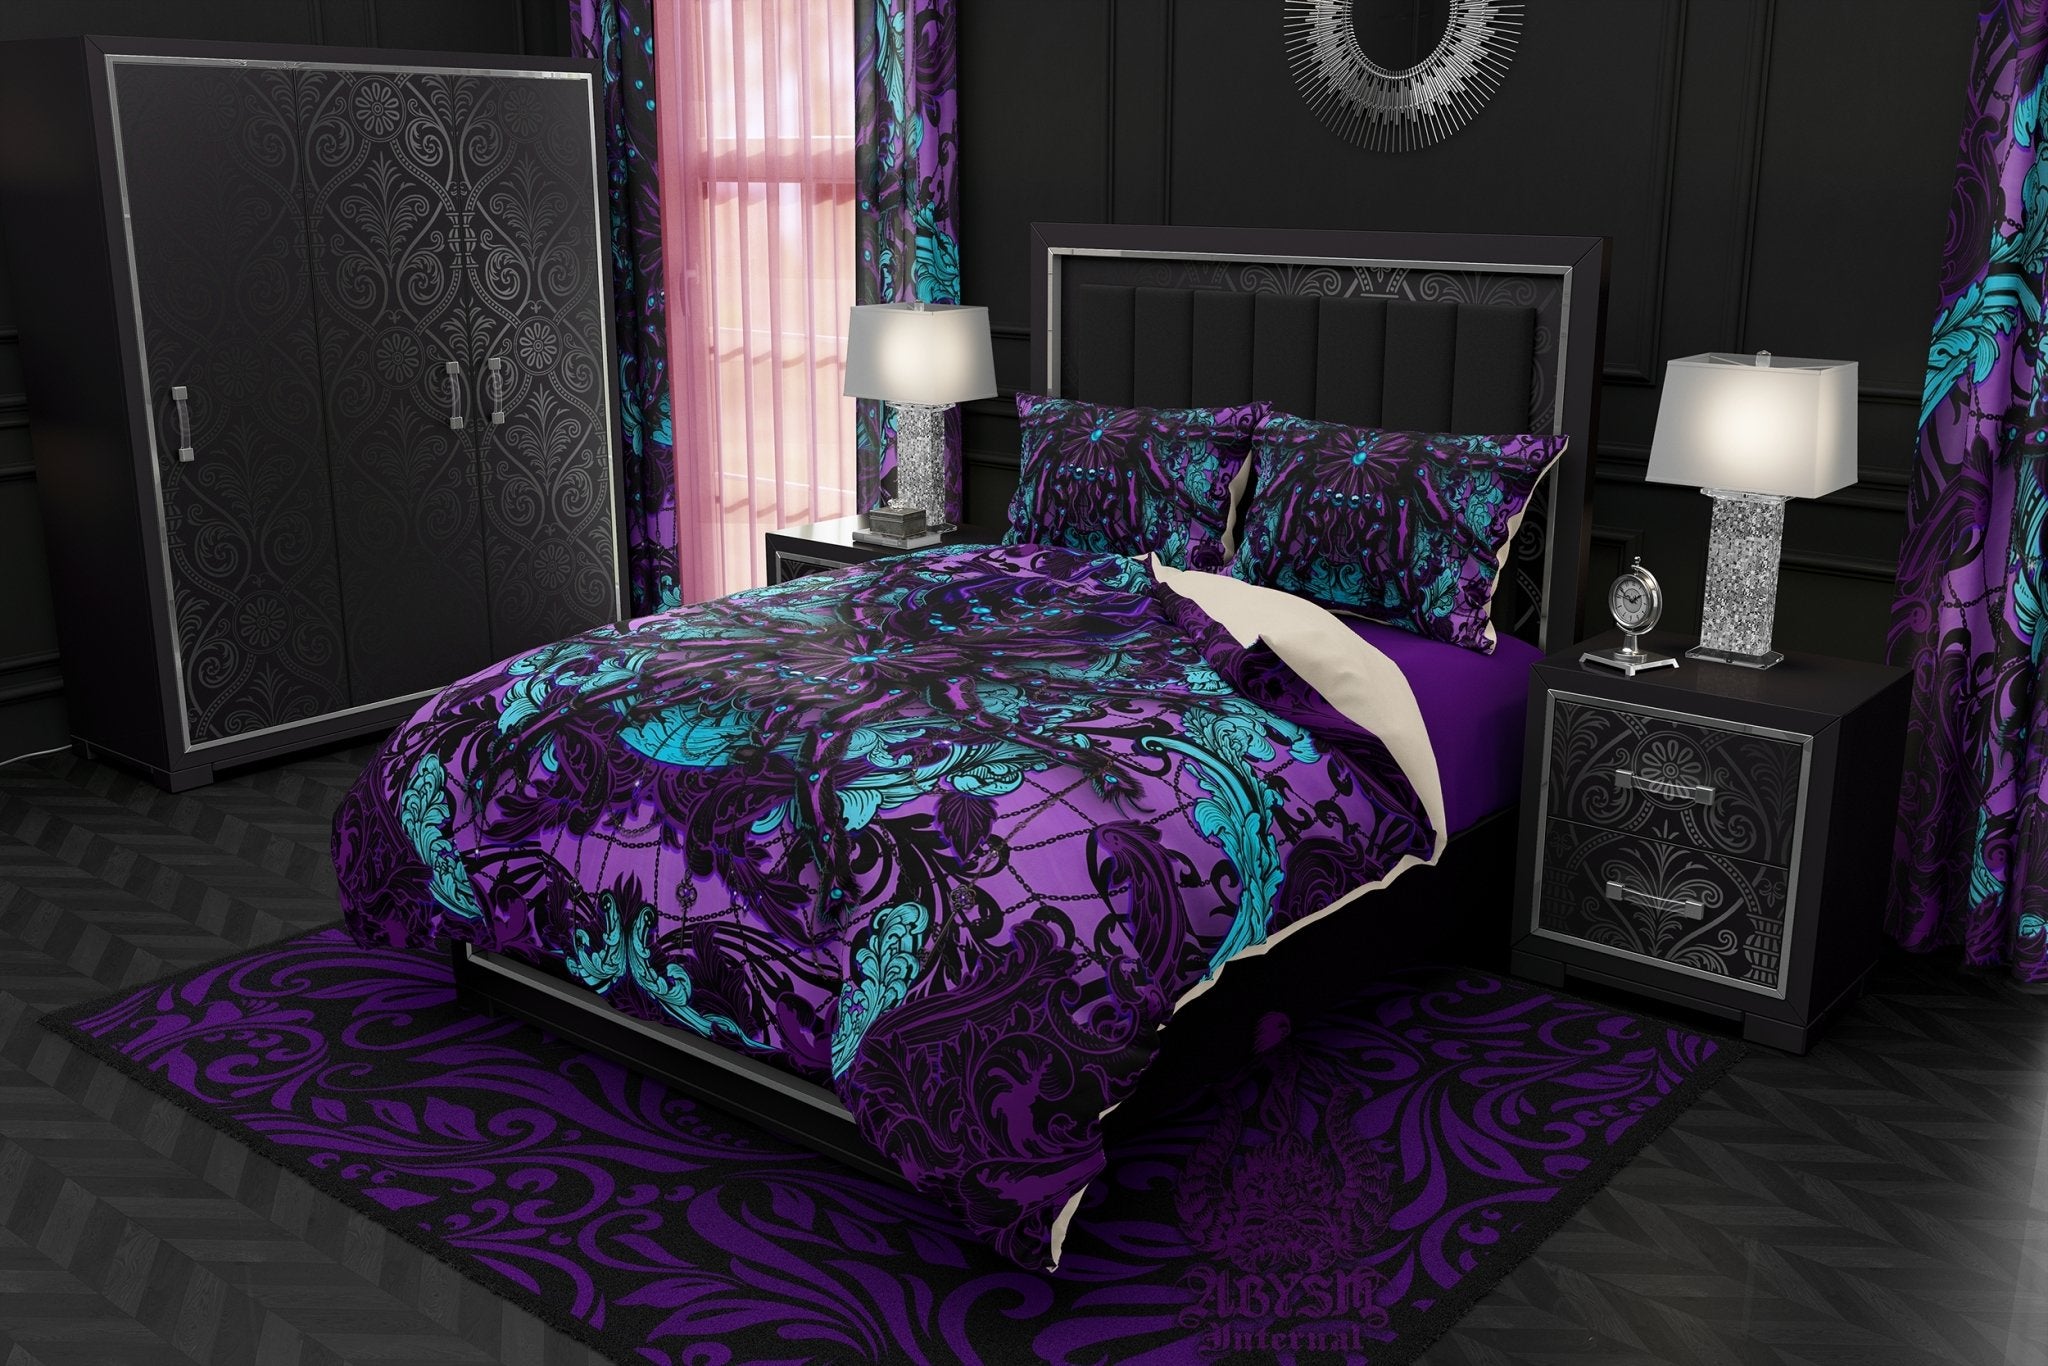 Pastel Goth Bedding Set, Comforter and Duvet, Bed Cover and Bedroom Decor, King, Queen and Twin Size - Tarantula Spider Black and Purple - Abysm Internal